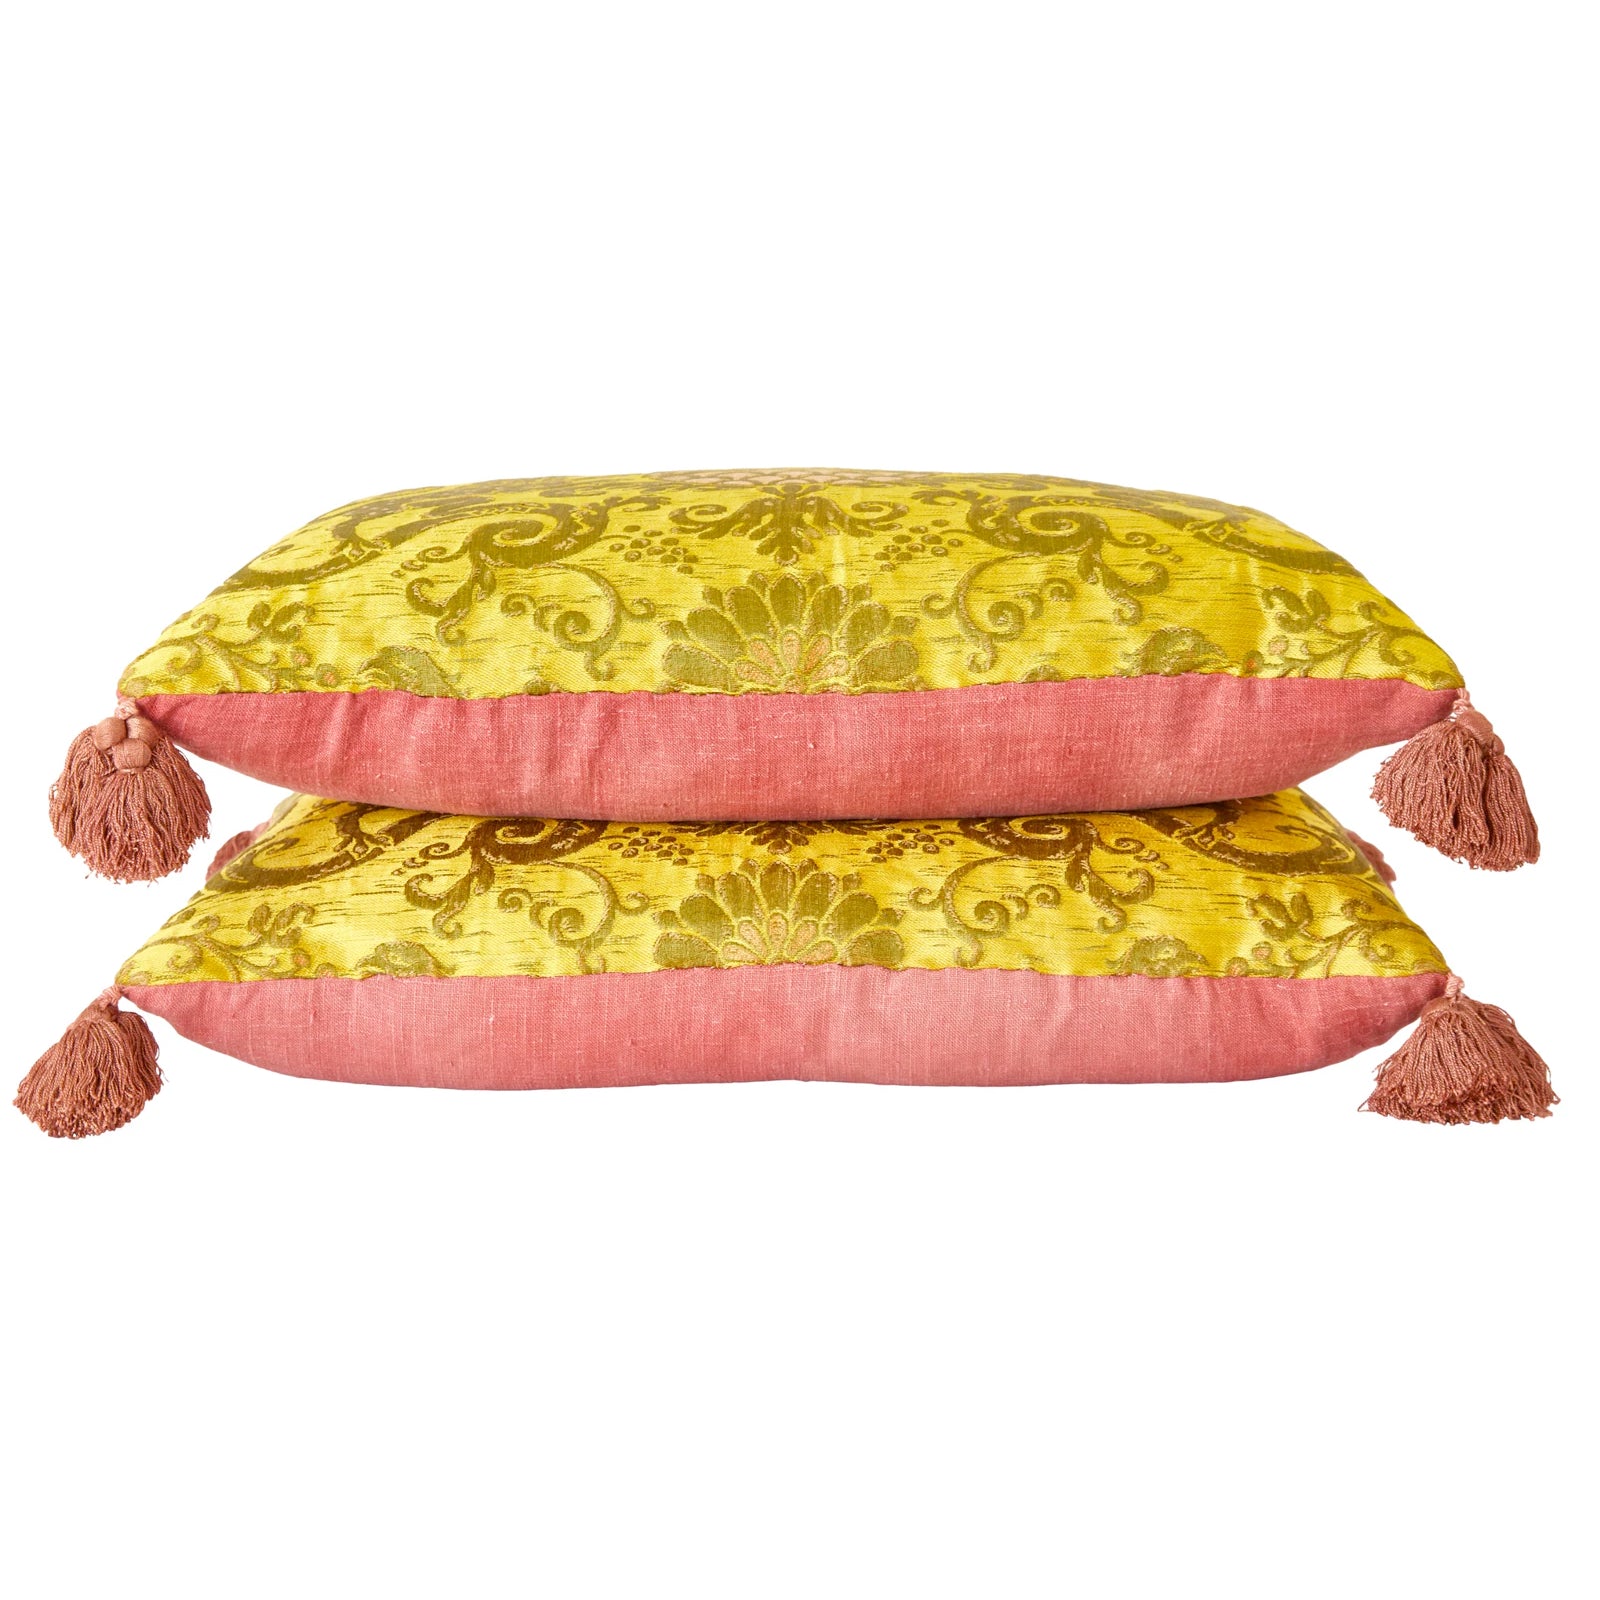 A Pair of Yellow Early 19th Century Italian Silk Brocade Cushions with Antique Rose Silk Tassels